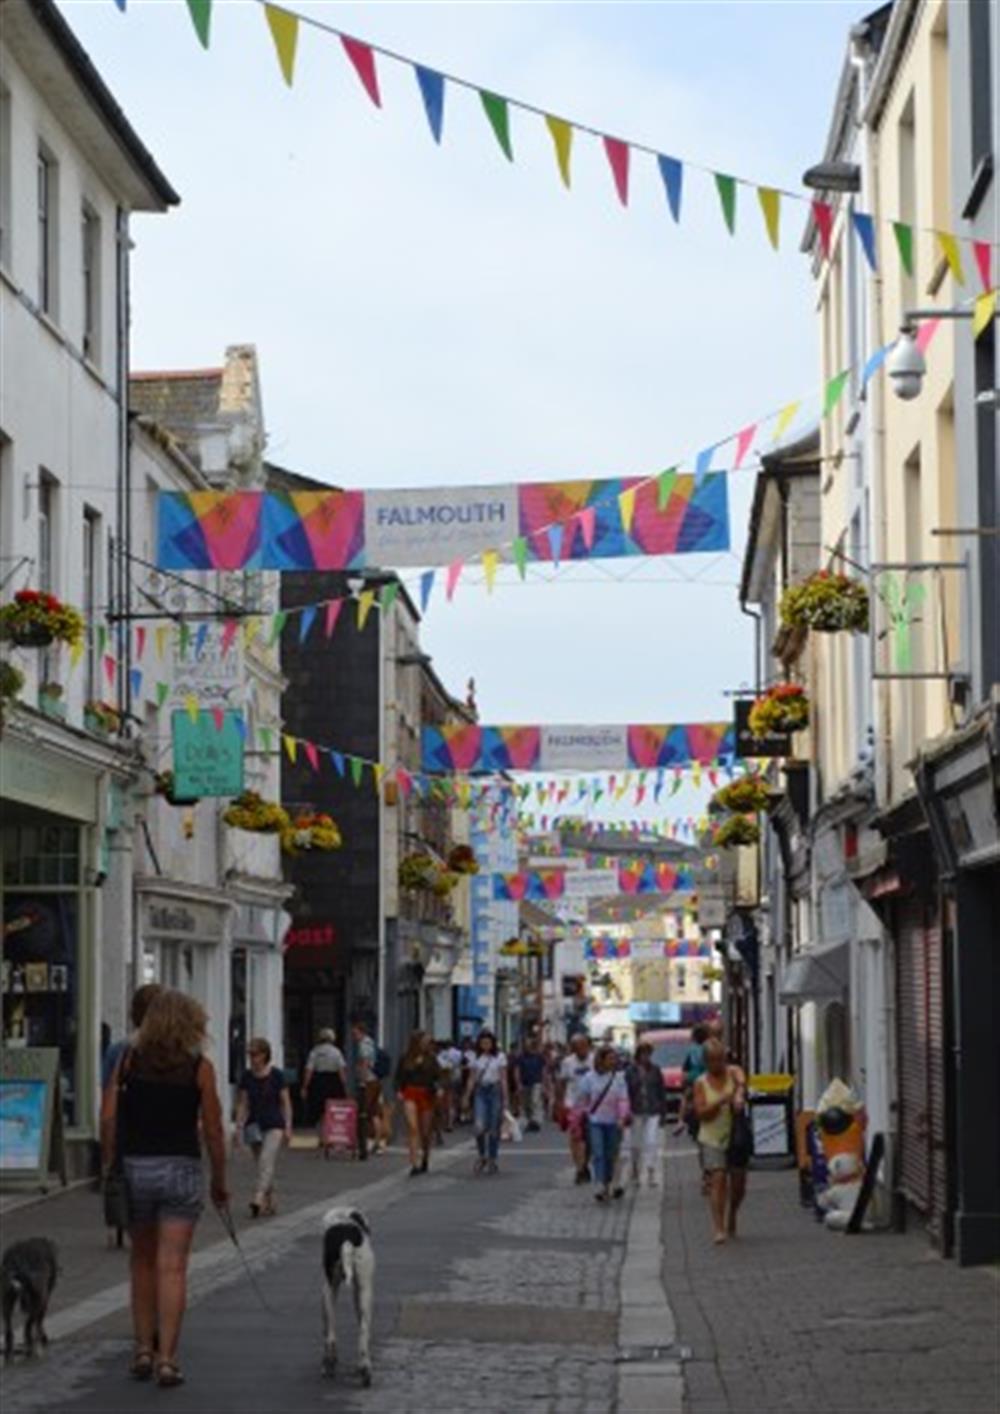 Visit Falmouth for high street shops, plus a range of art galleries and gift shops.